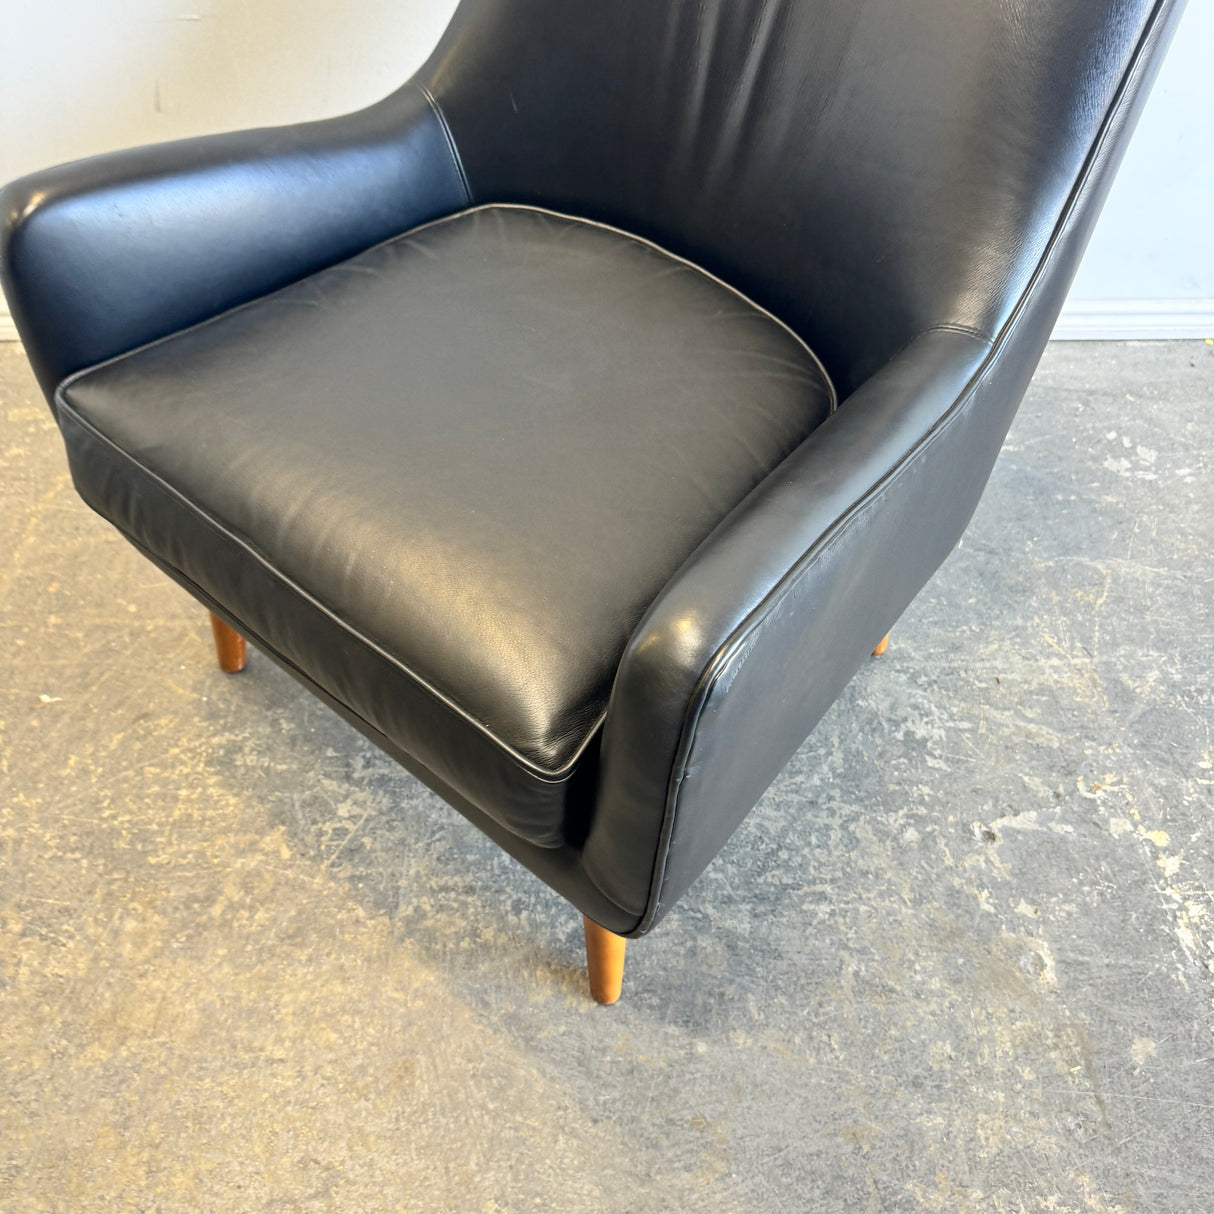 Room and Board Quinn Leather Lounge chair